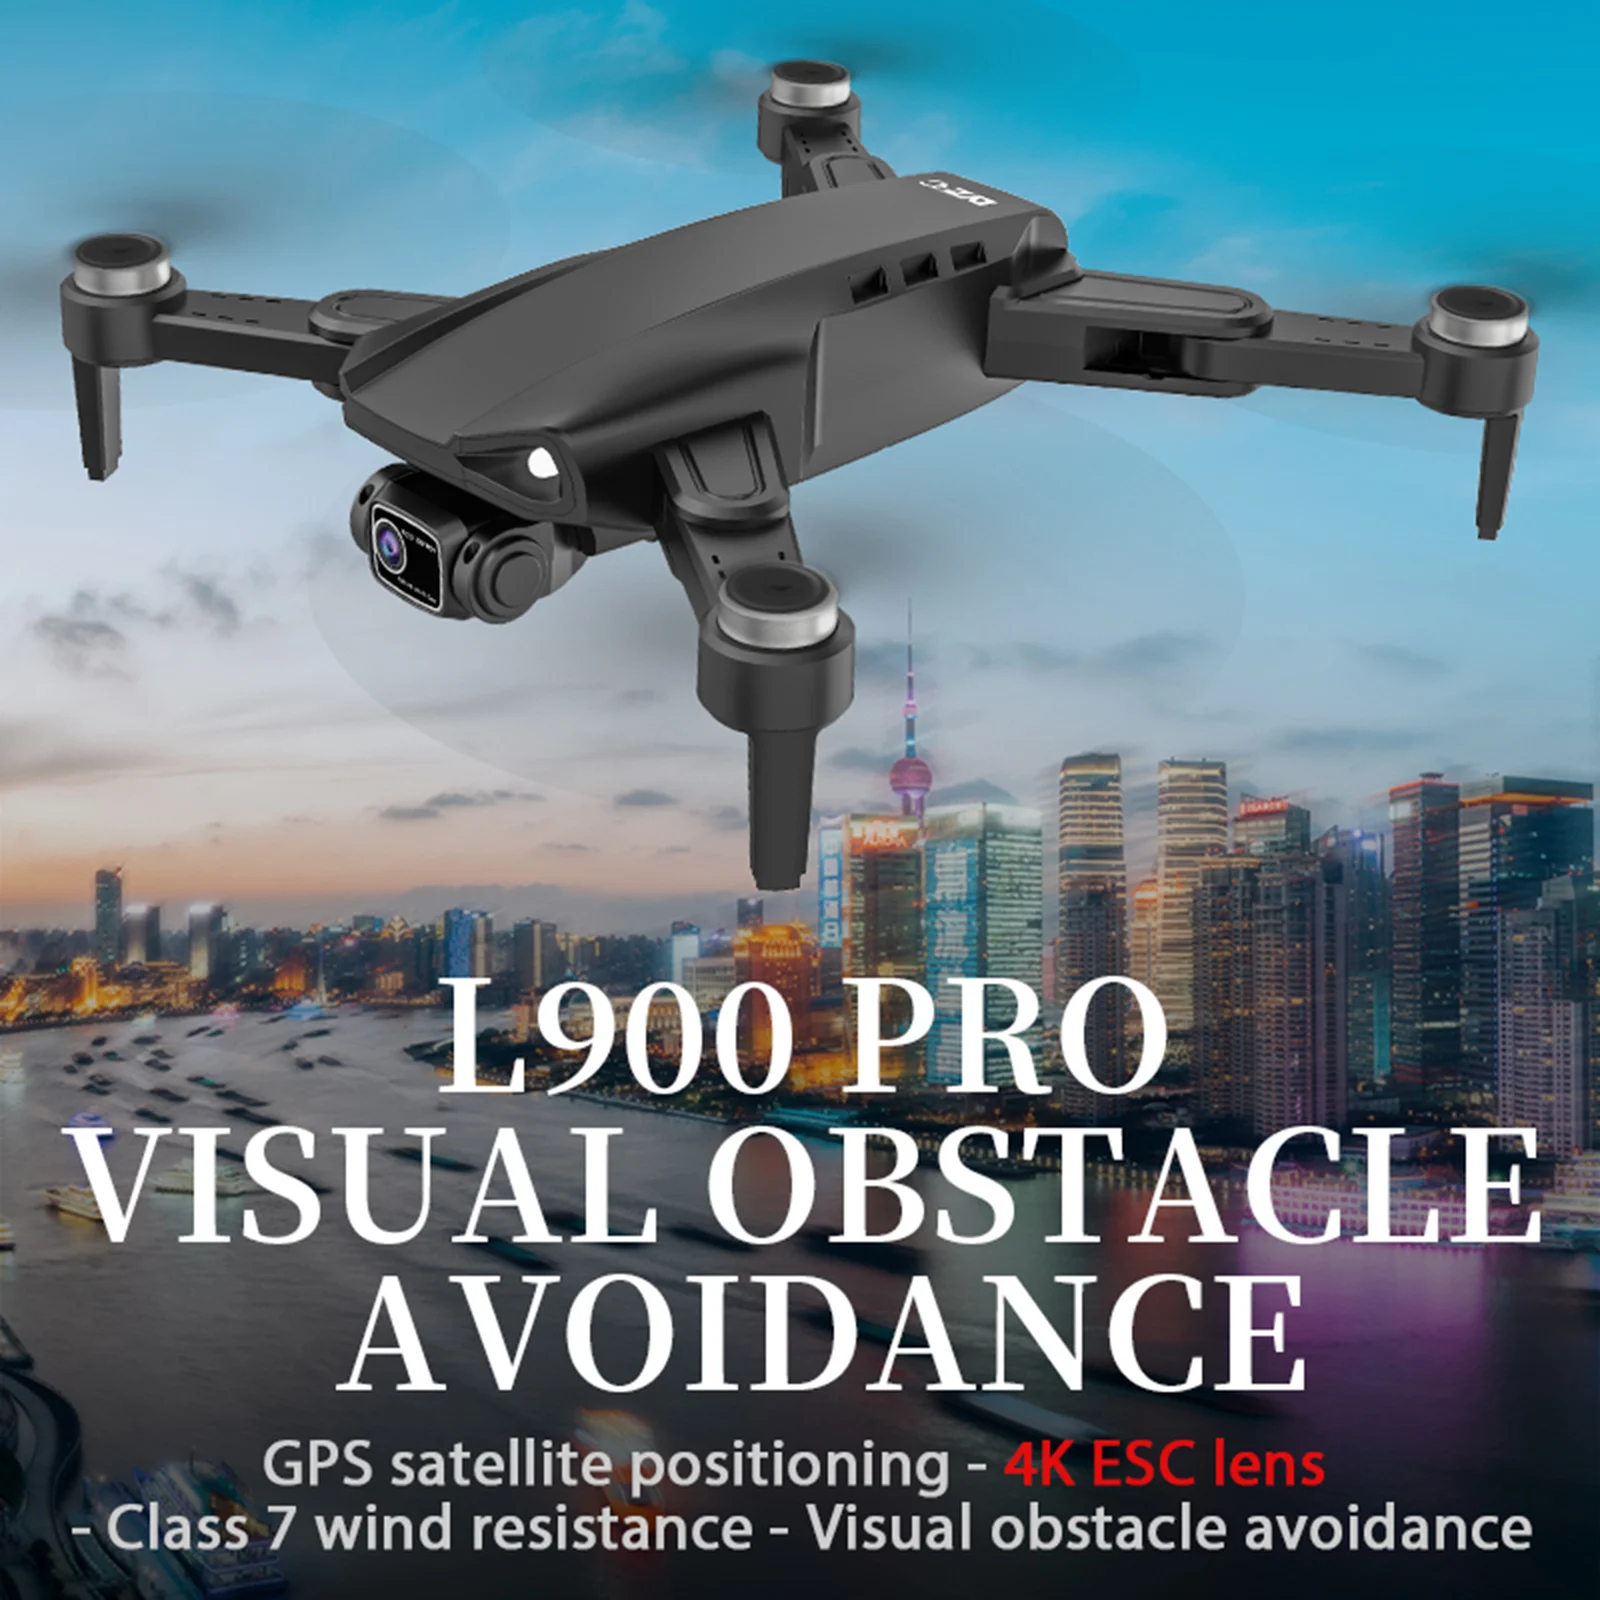 L900 Pro SE 5G GPS FPV 4K Ultra HD Camera Drone Brushless Motor Vision Obstacle Avoidance Professional Drone Auto Return 25 Minu